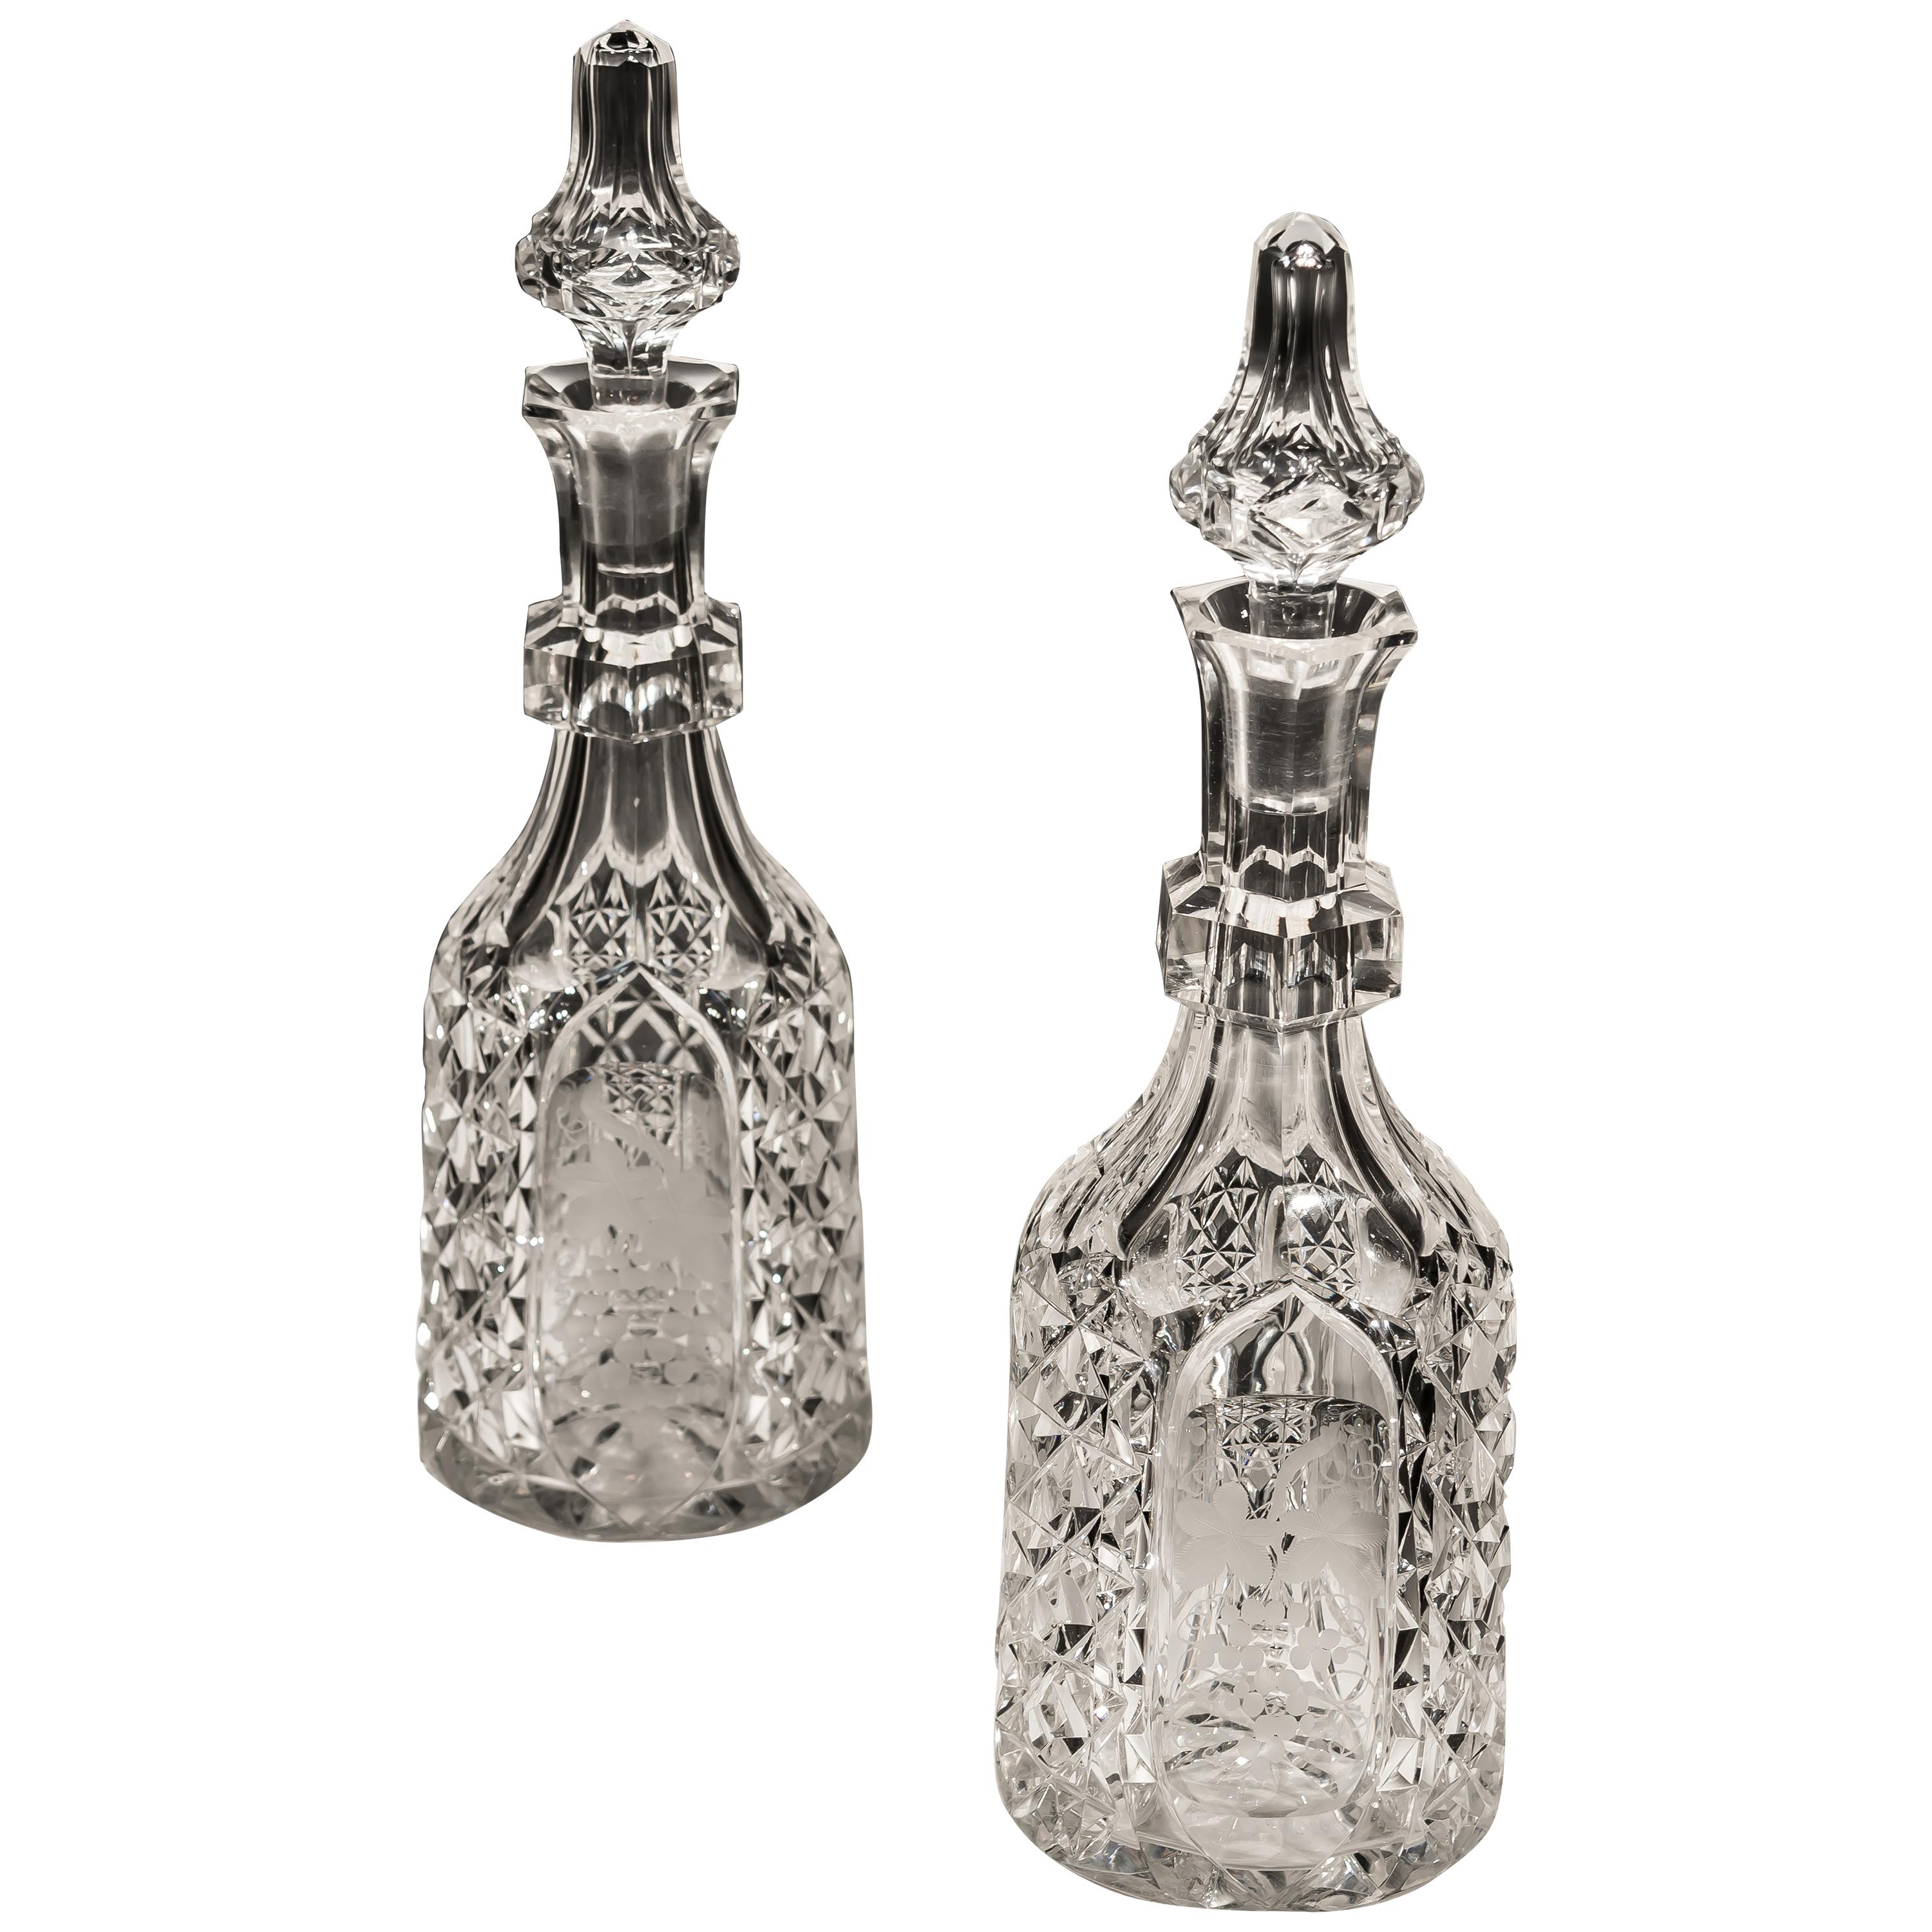 Pair of Victorian Cut Glass Decanters with Engraved Panels of Fruiting Vines